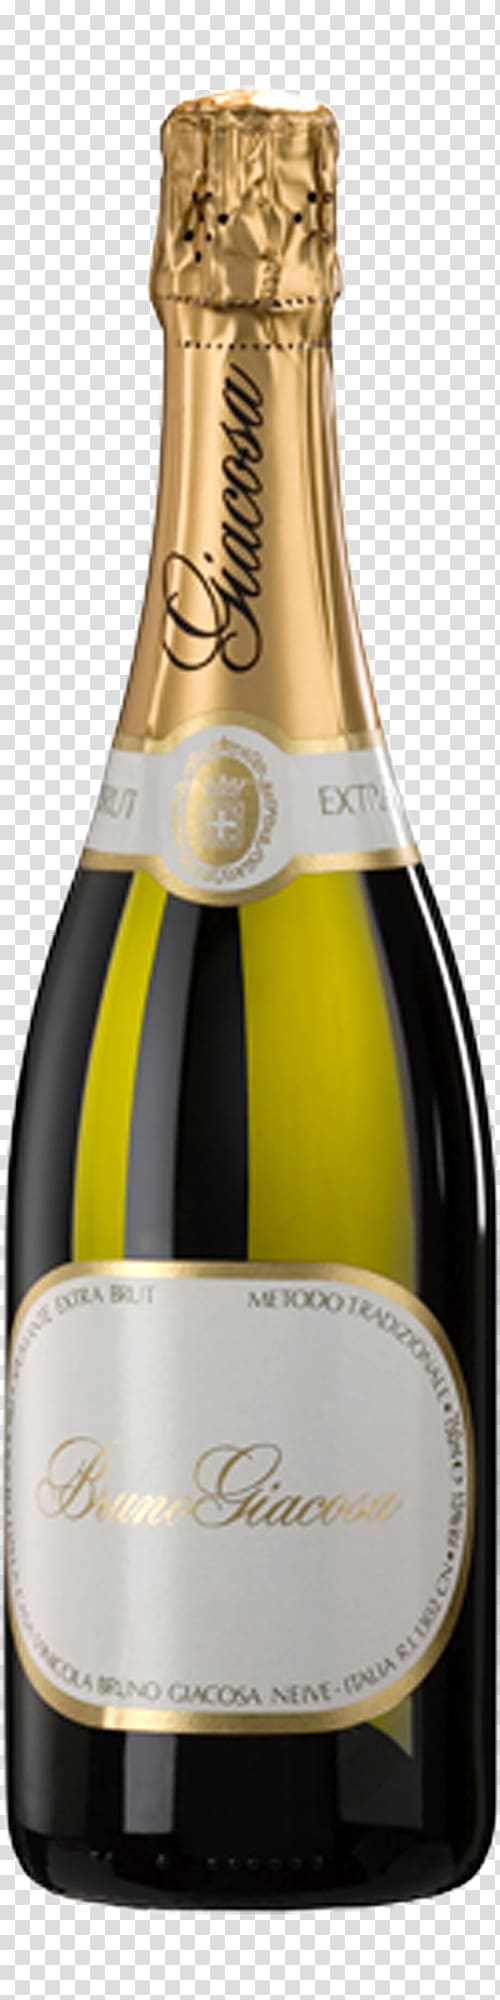 Champagne Bruno Giacosa Wine Arneis Dolcetto, champagne transparent background PNG clipart